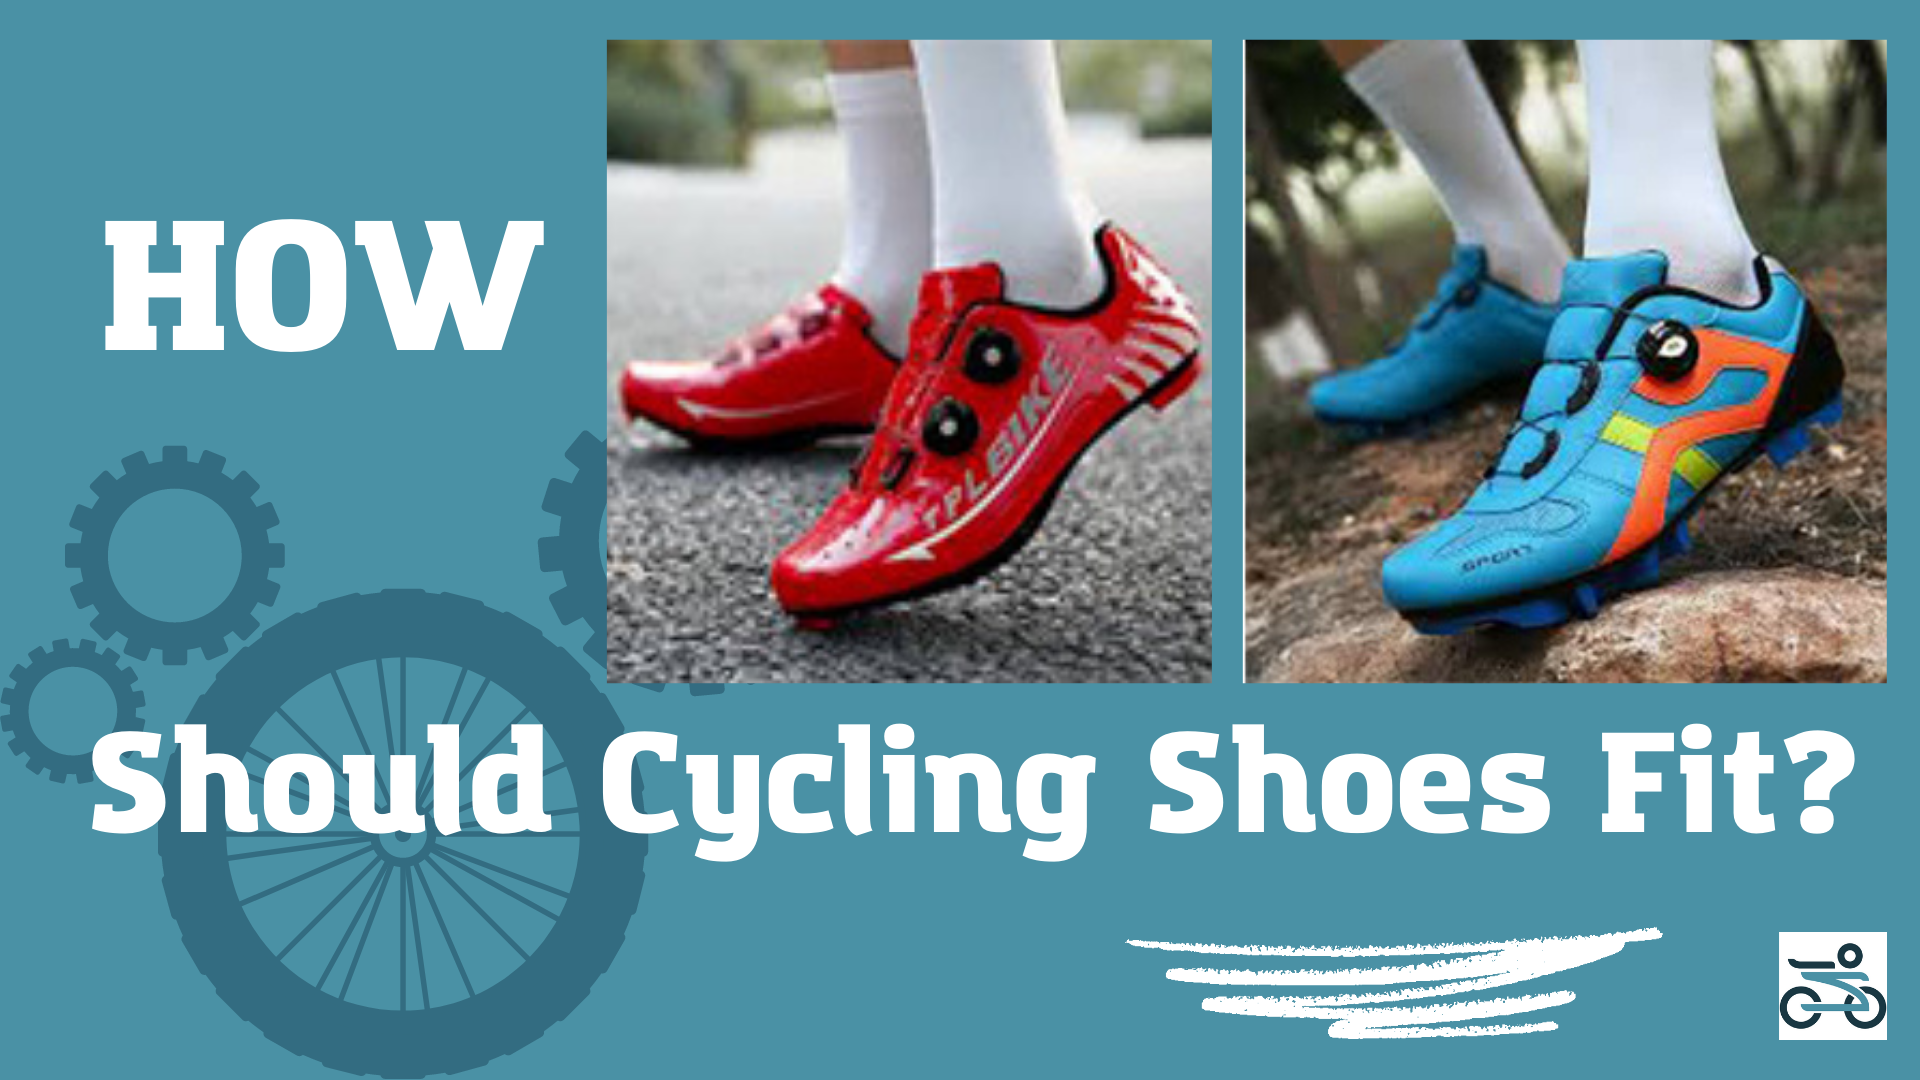 How Should Cycling Shoes Fit - 8 tips for the right choice